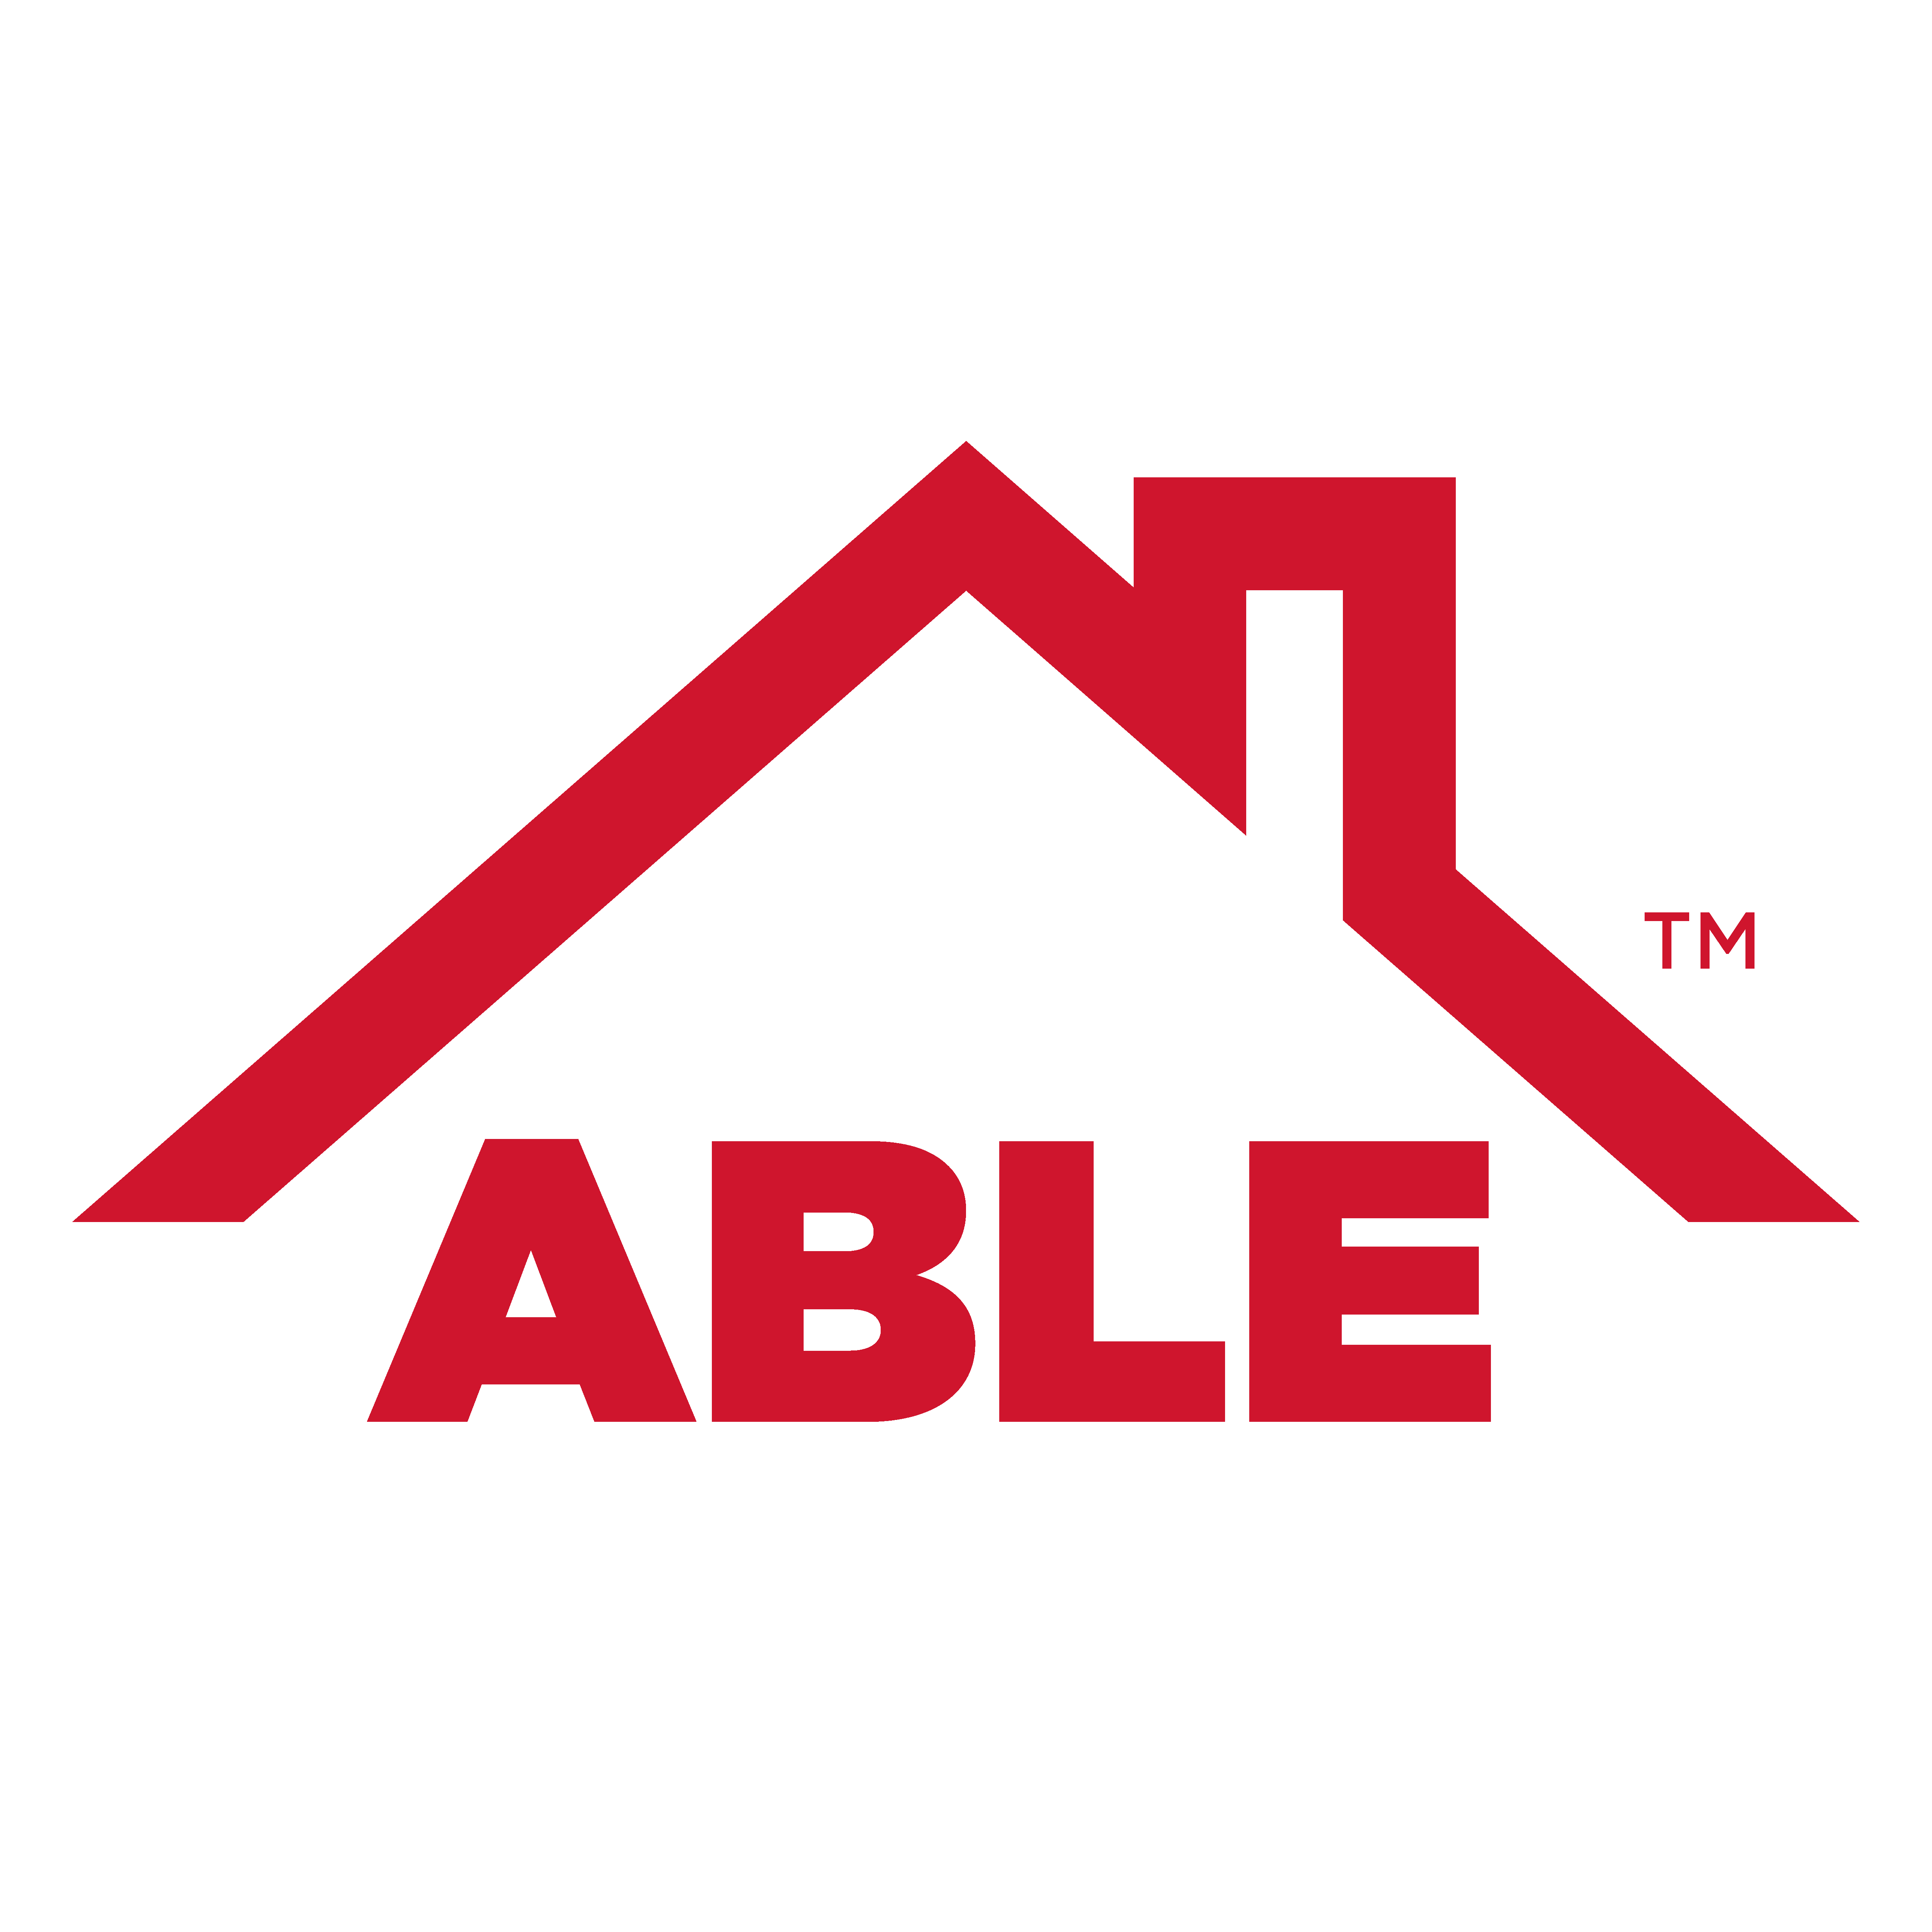 Able Roof